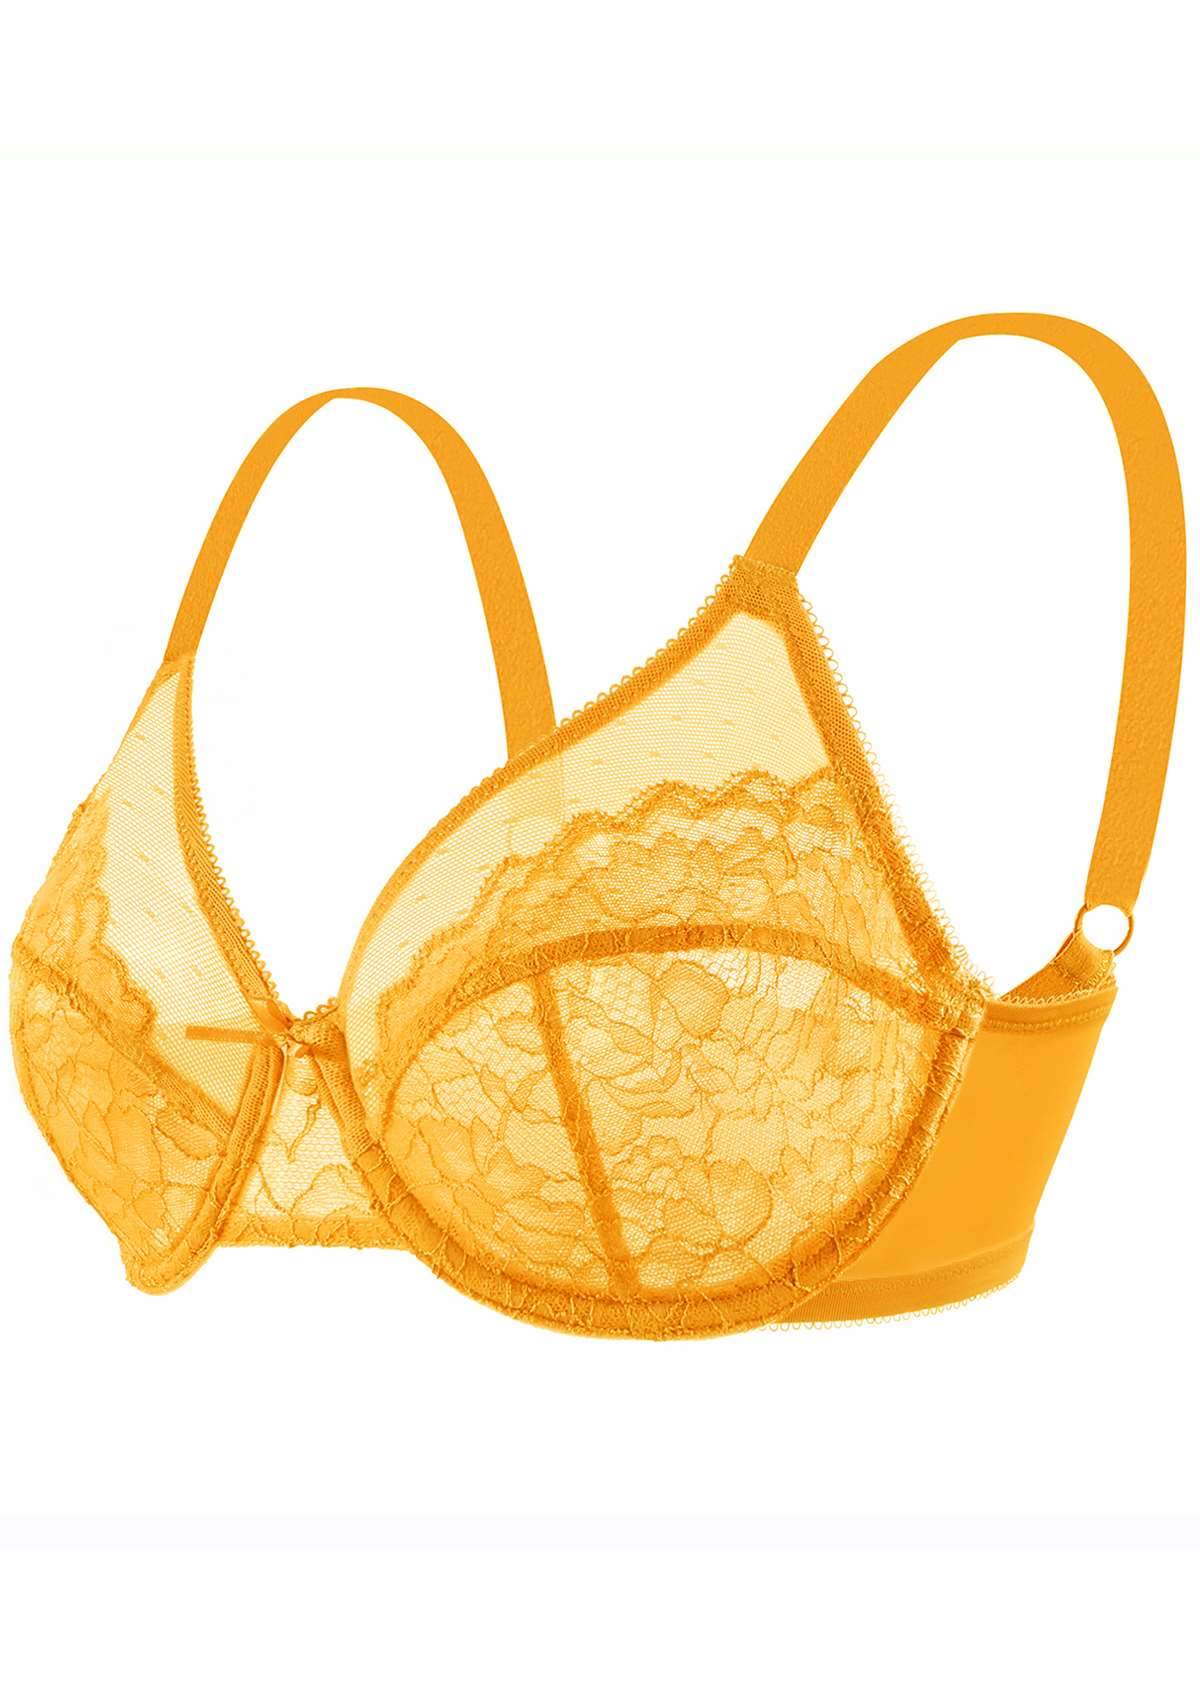 HSIA Enchante Bra And Panty Sets: Unpadded Bra With Back Support - Cadmium Yellow / 34 / DDD/F